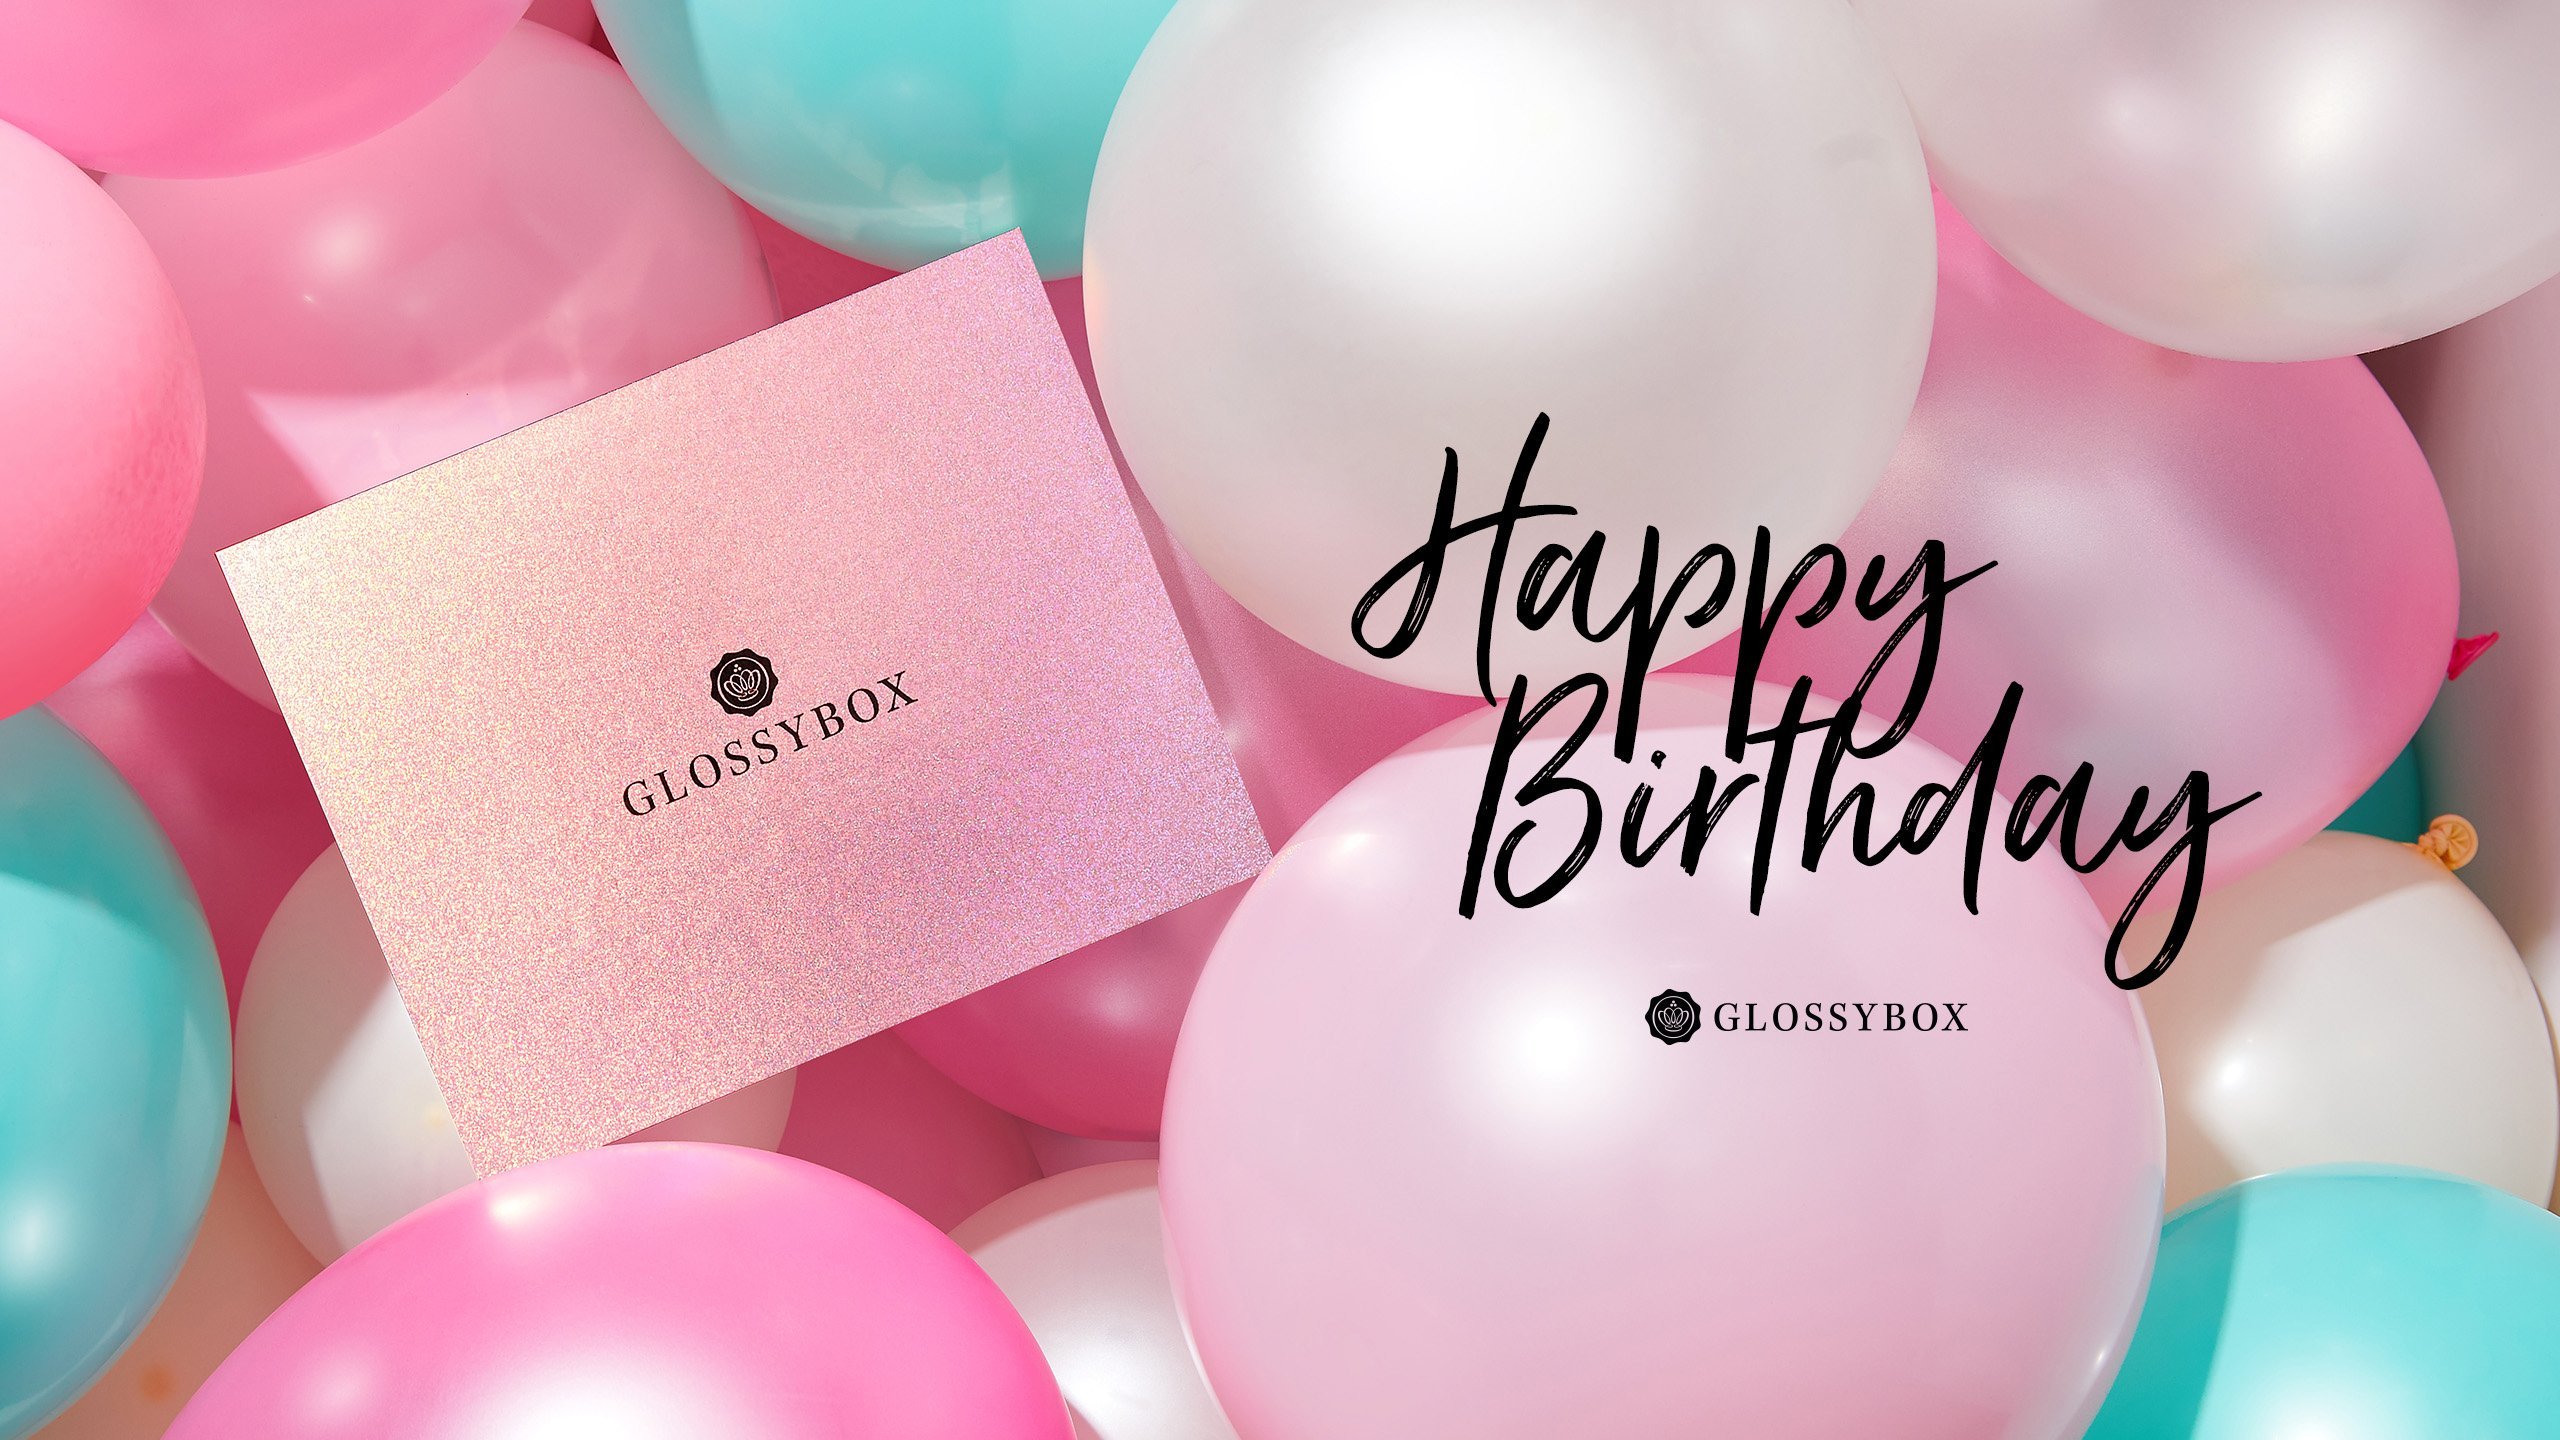 Les wallpapers d ao t Happy  birthday  Glossybox GLOSSYBOX